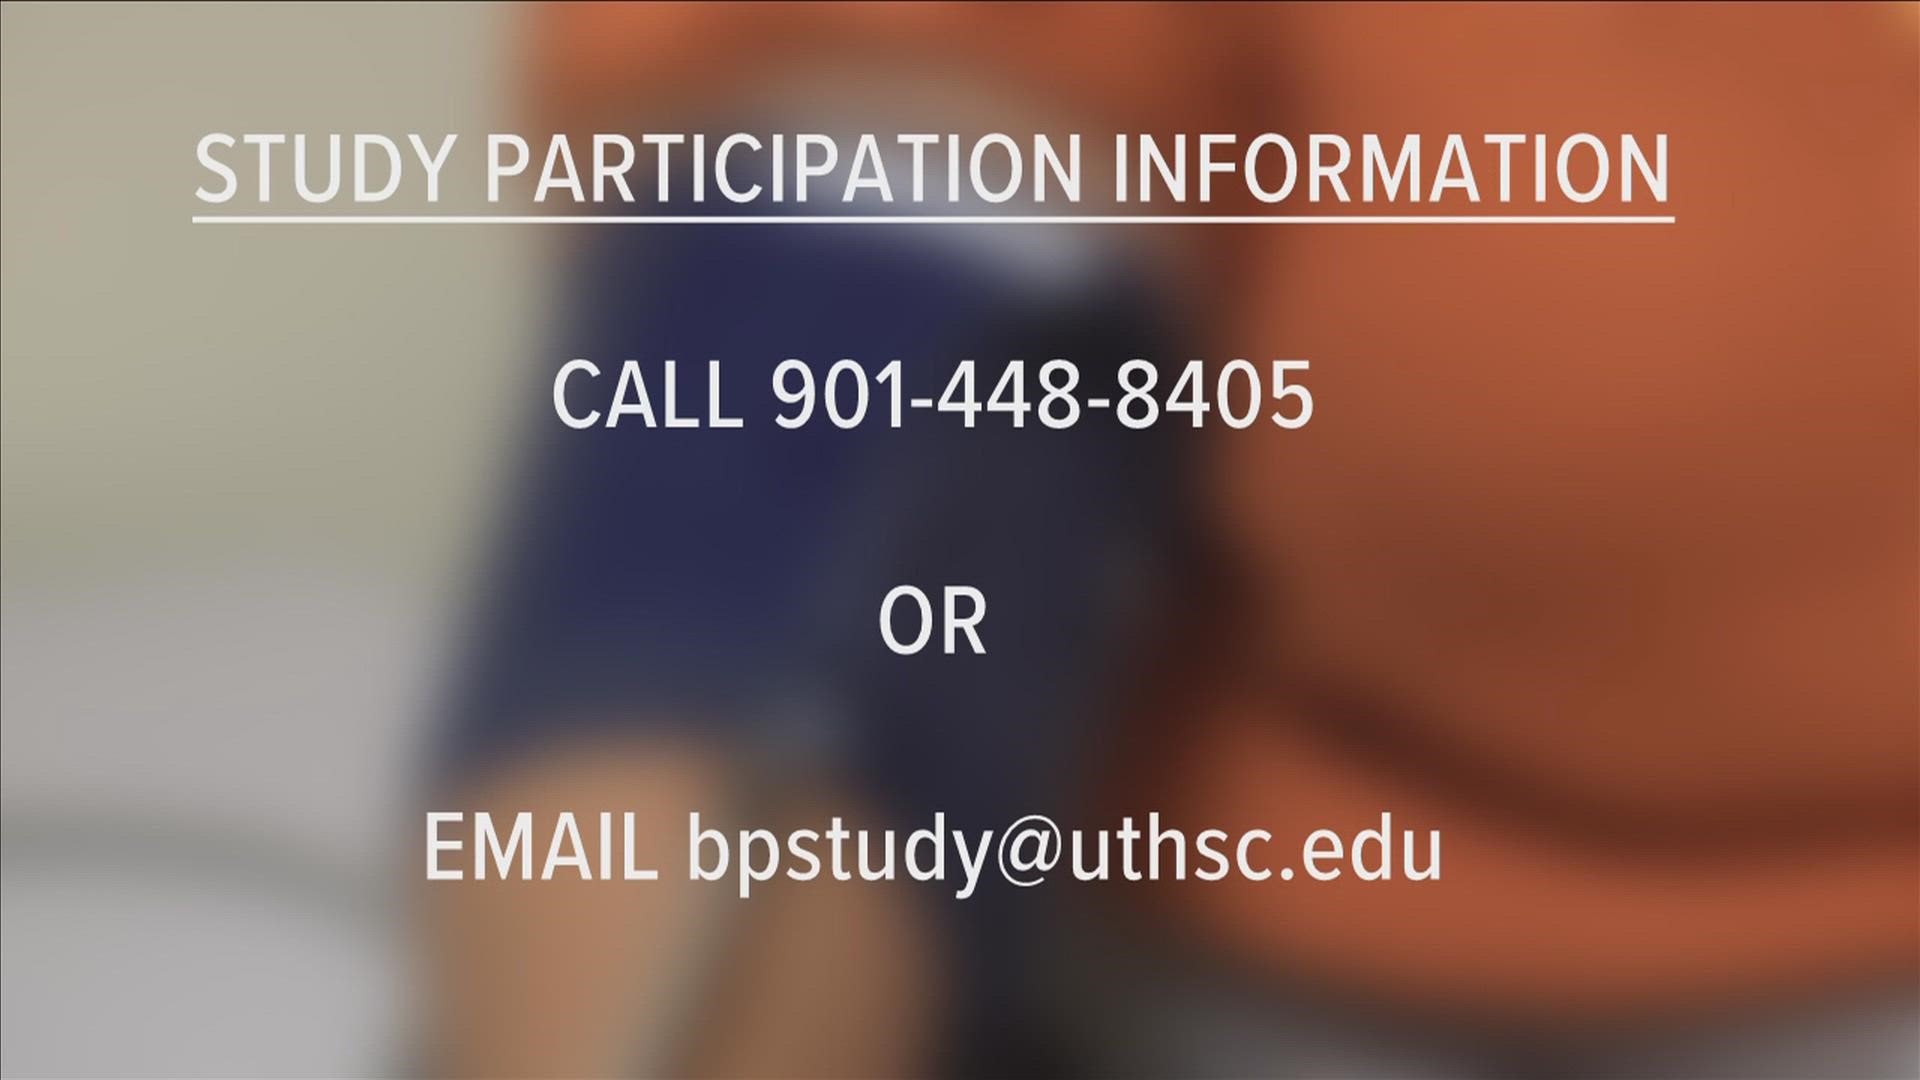 Anyone interested in finding out more about the study and possibly participating can call 901-448-8405 or email bpstudy@uthsc.edu.